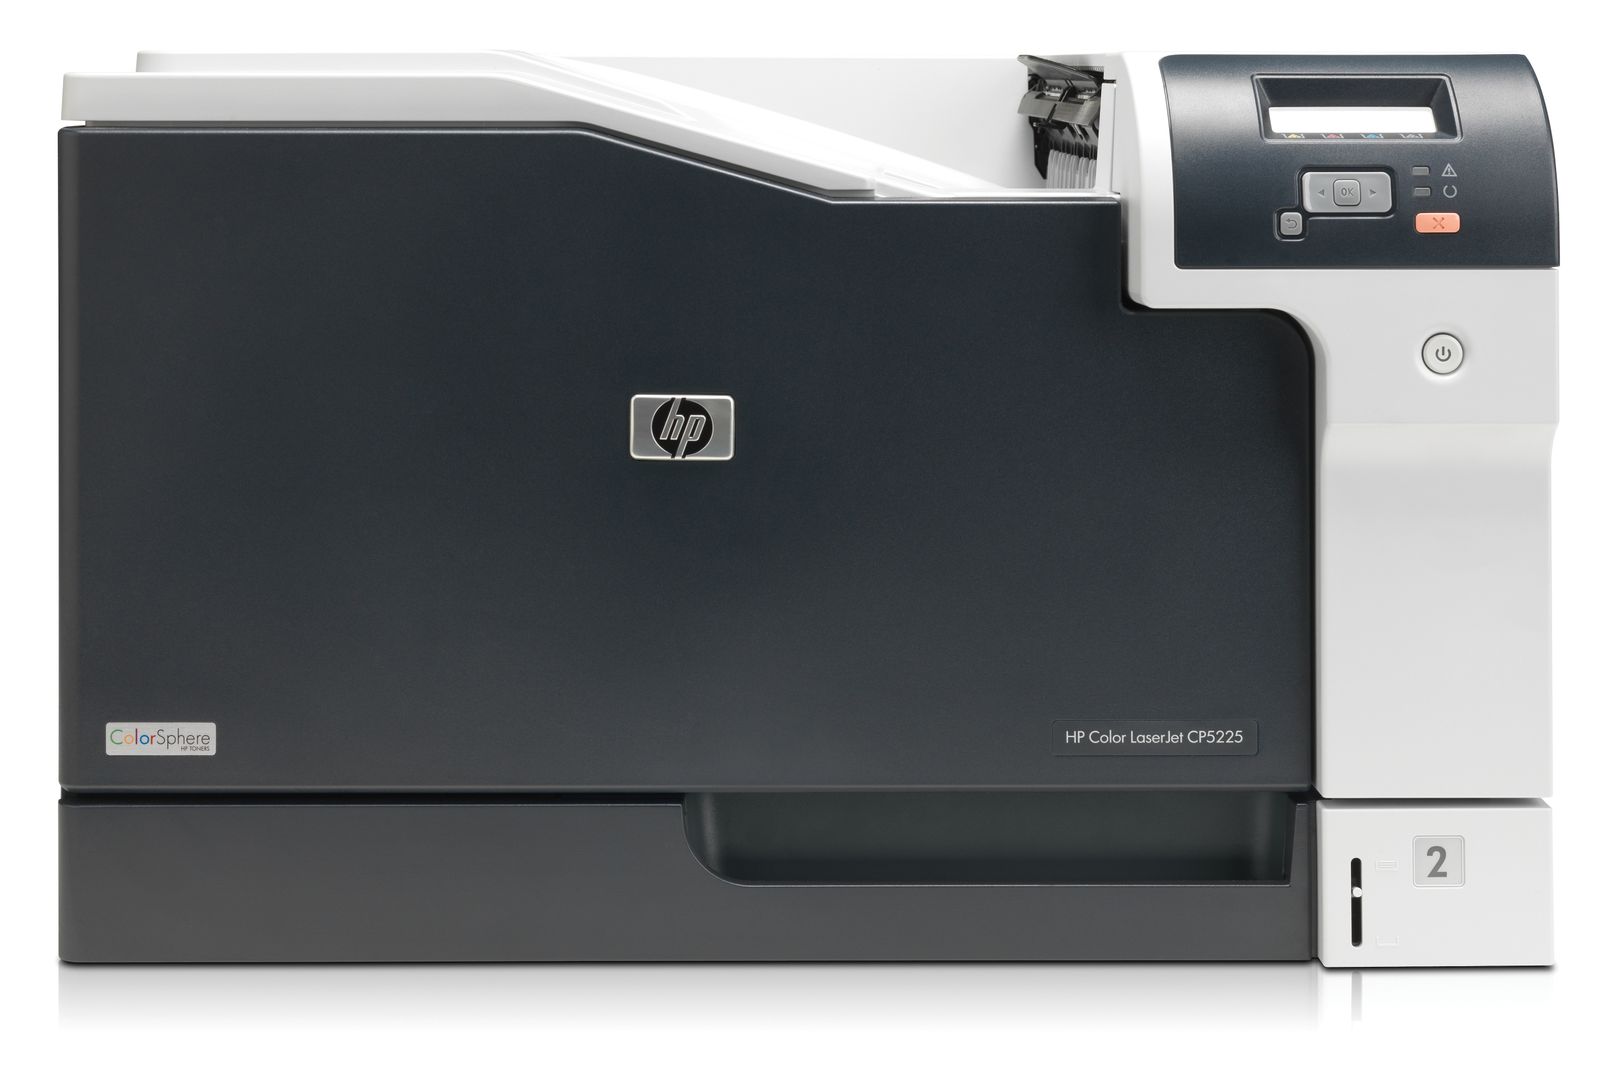 HP P LaserJet Professional CP5225dn 20ppm mono and colour, A4, A3, duplex, 600x600dpi, 192MB memory, 250 paper tray, 100 sheet multi purpose tray, hi-speed 2.0, fast ethernet | Synigo